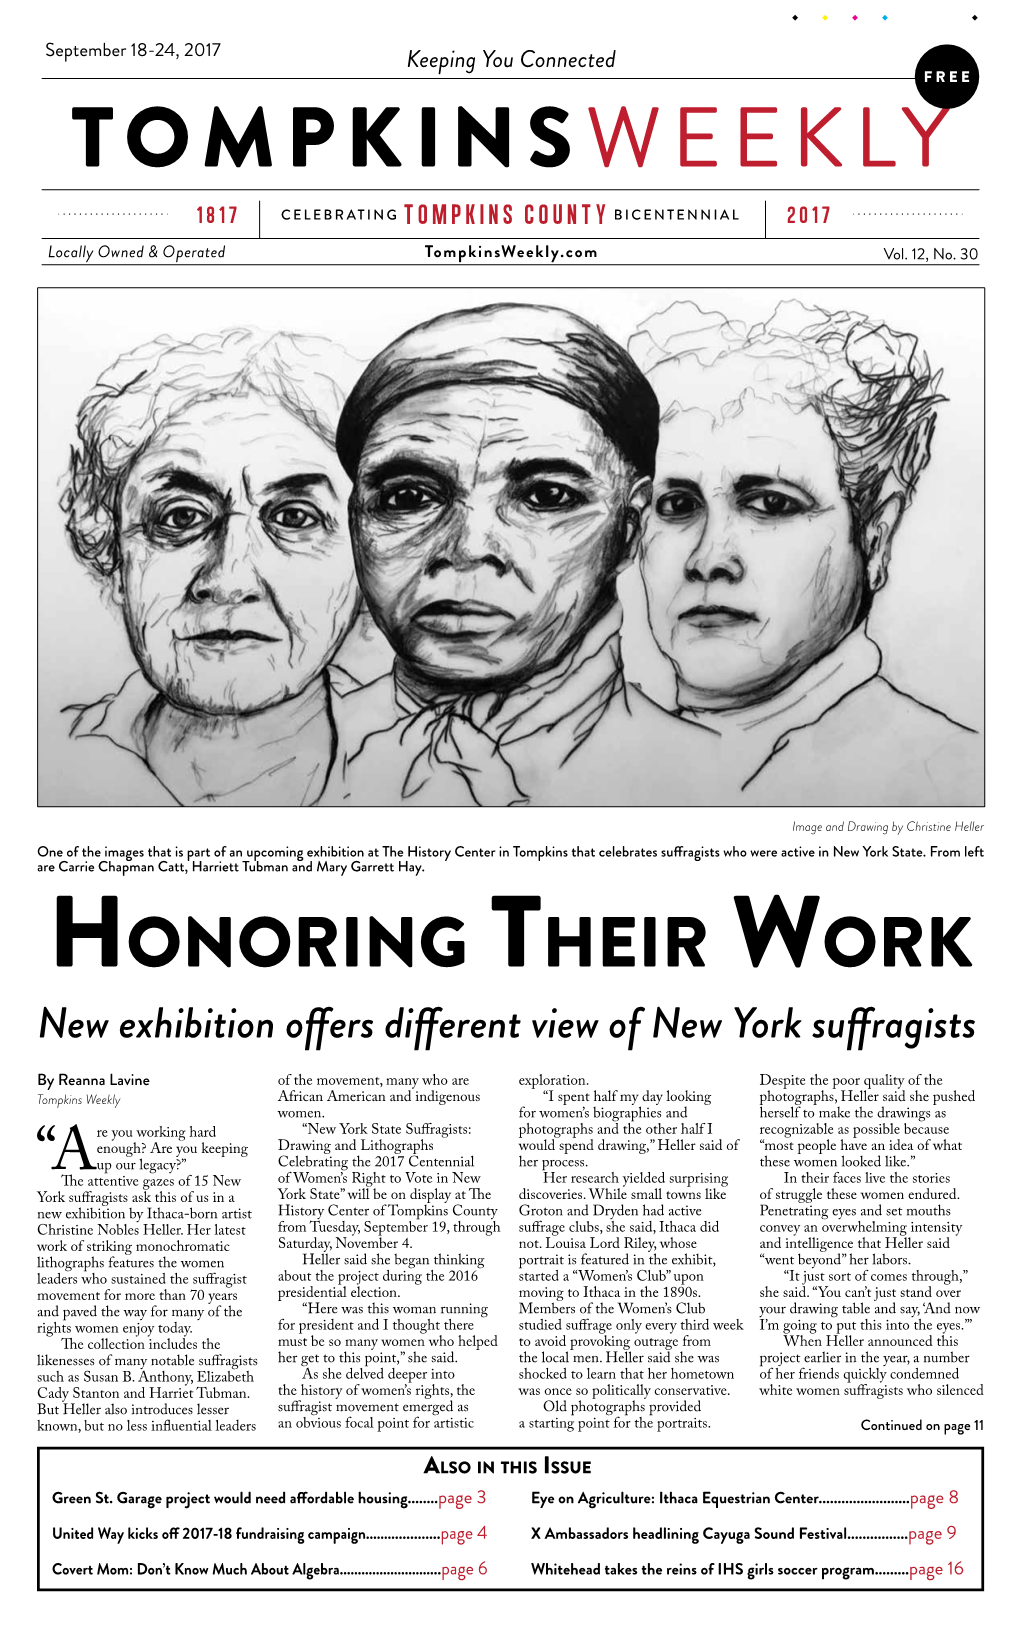 Honoring Their Work New Exhibition Offers Different View of New York Suffragists